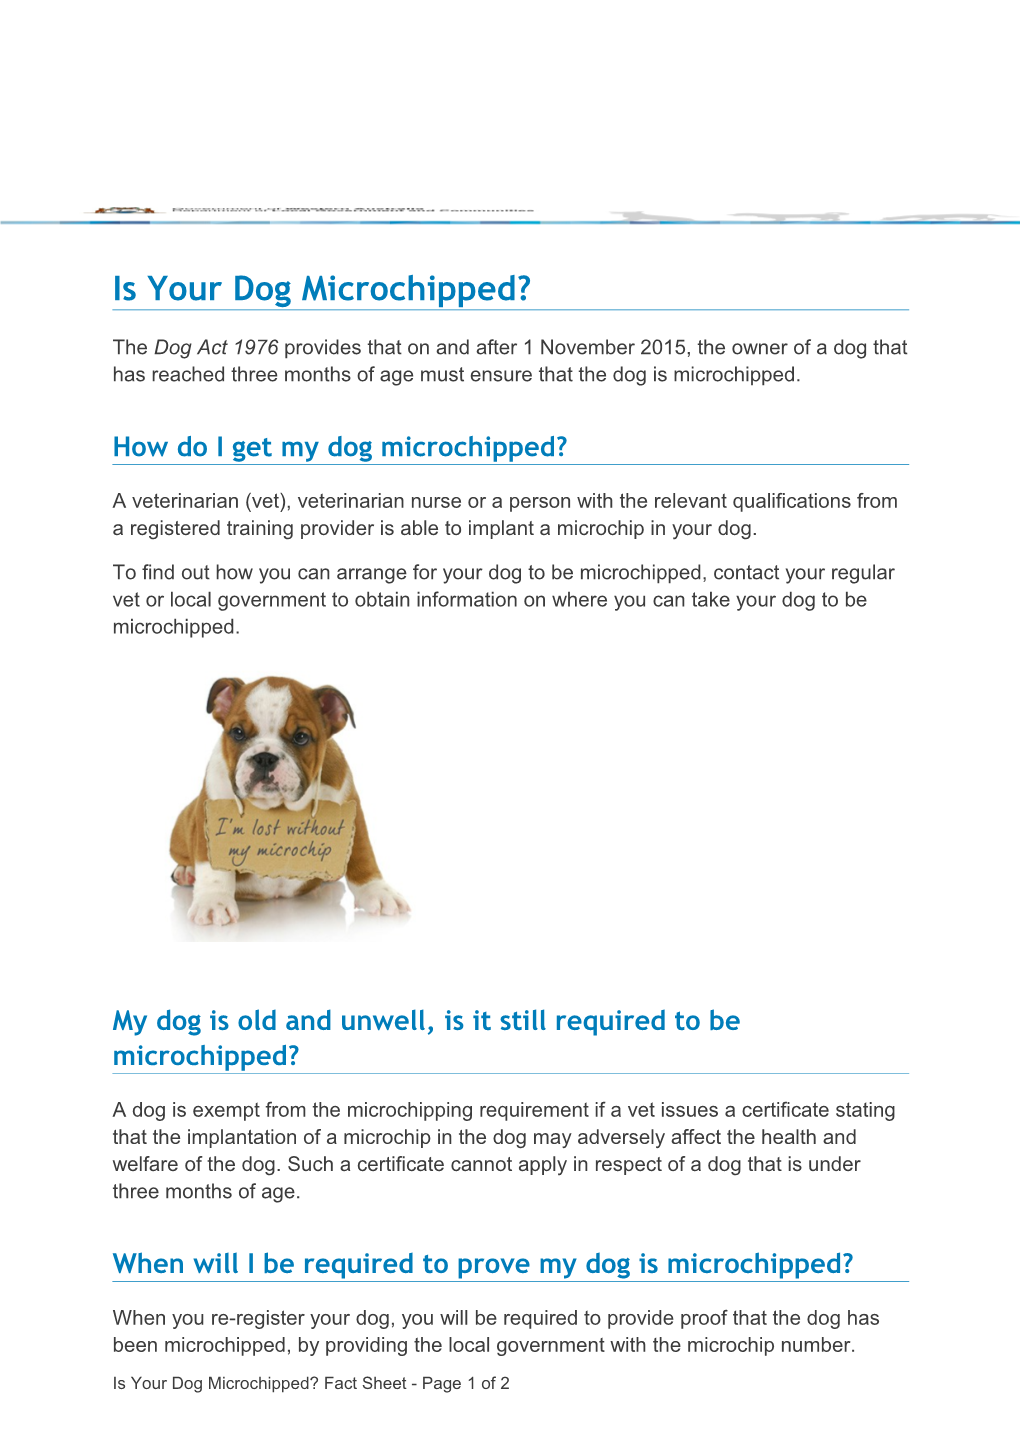 Is Your Dog Microchipped? - Fact Sheet